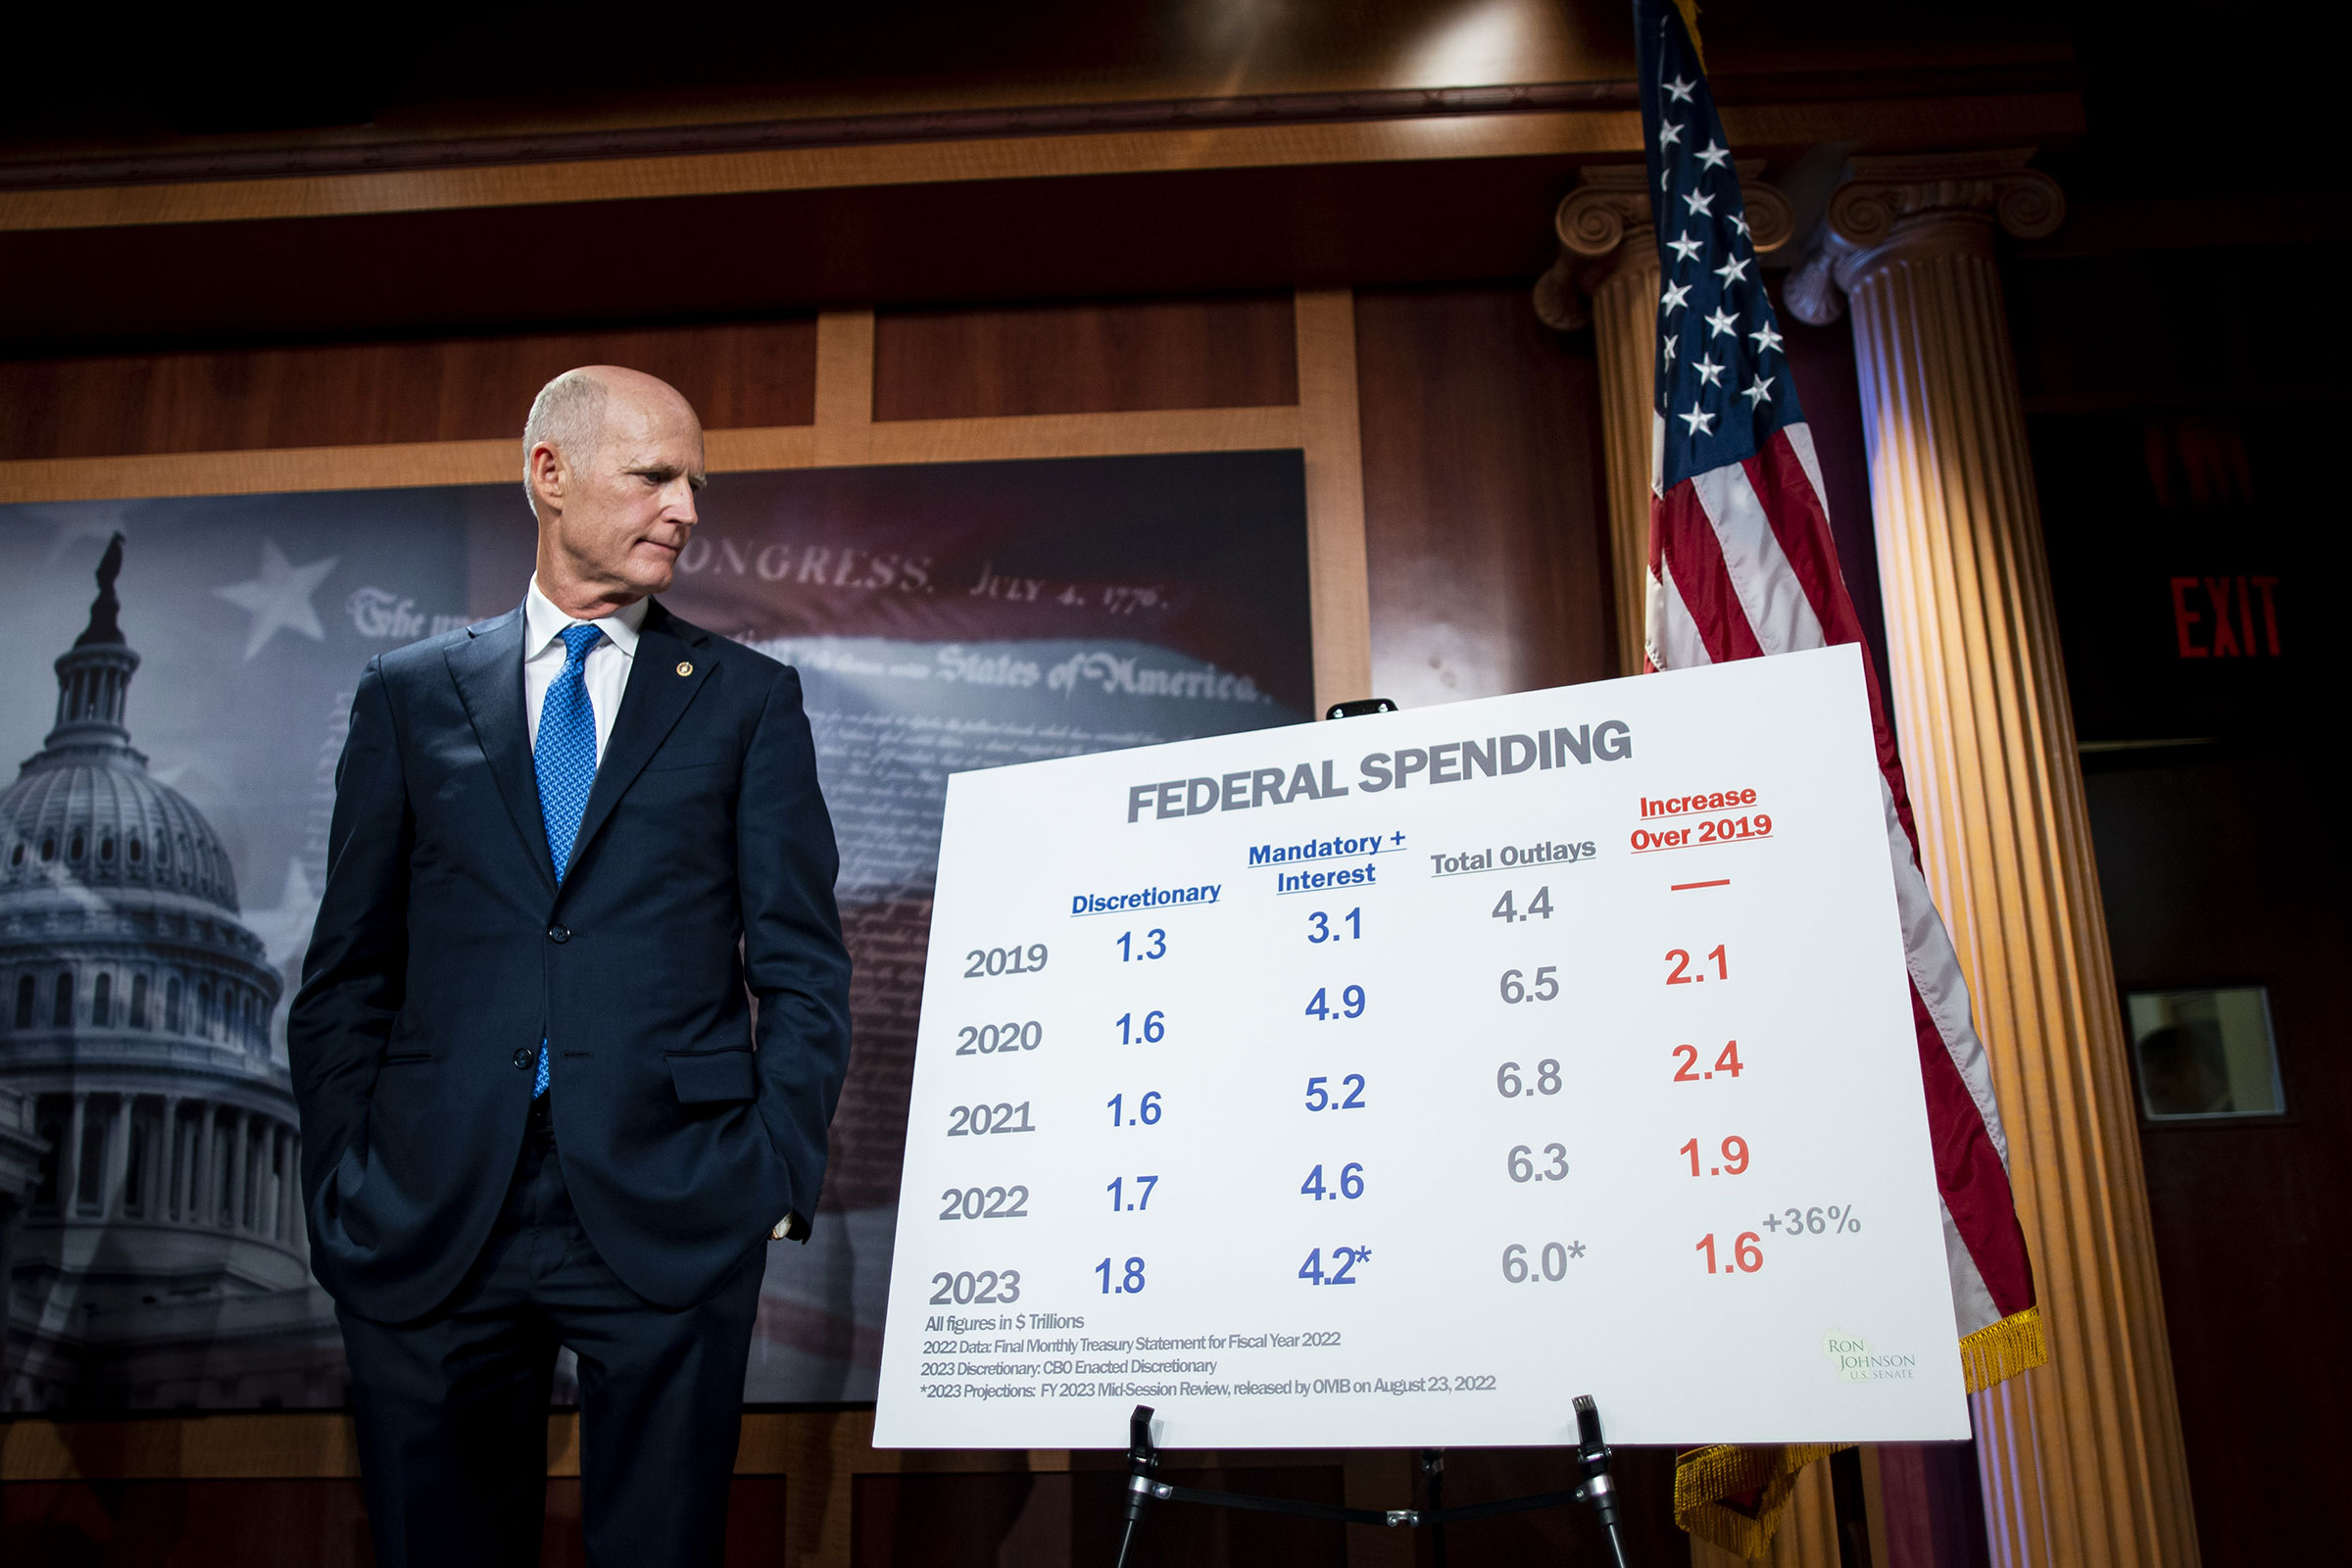 Scott during a news conference at the Capitol in Washington, on Jan. 25, 2023. (Al Drago—Bloomberg/Getty Images)